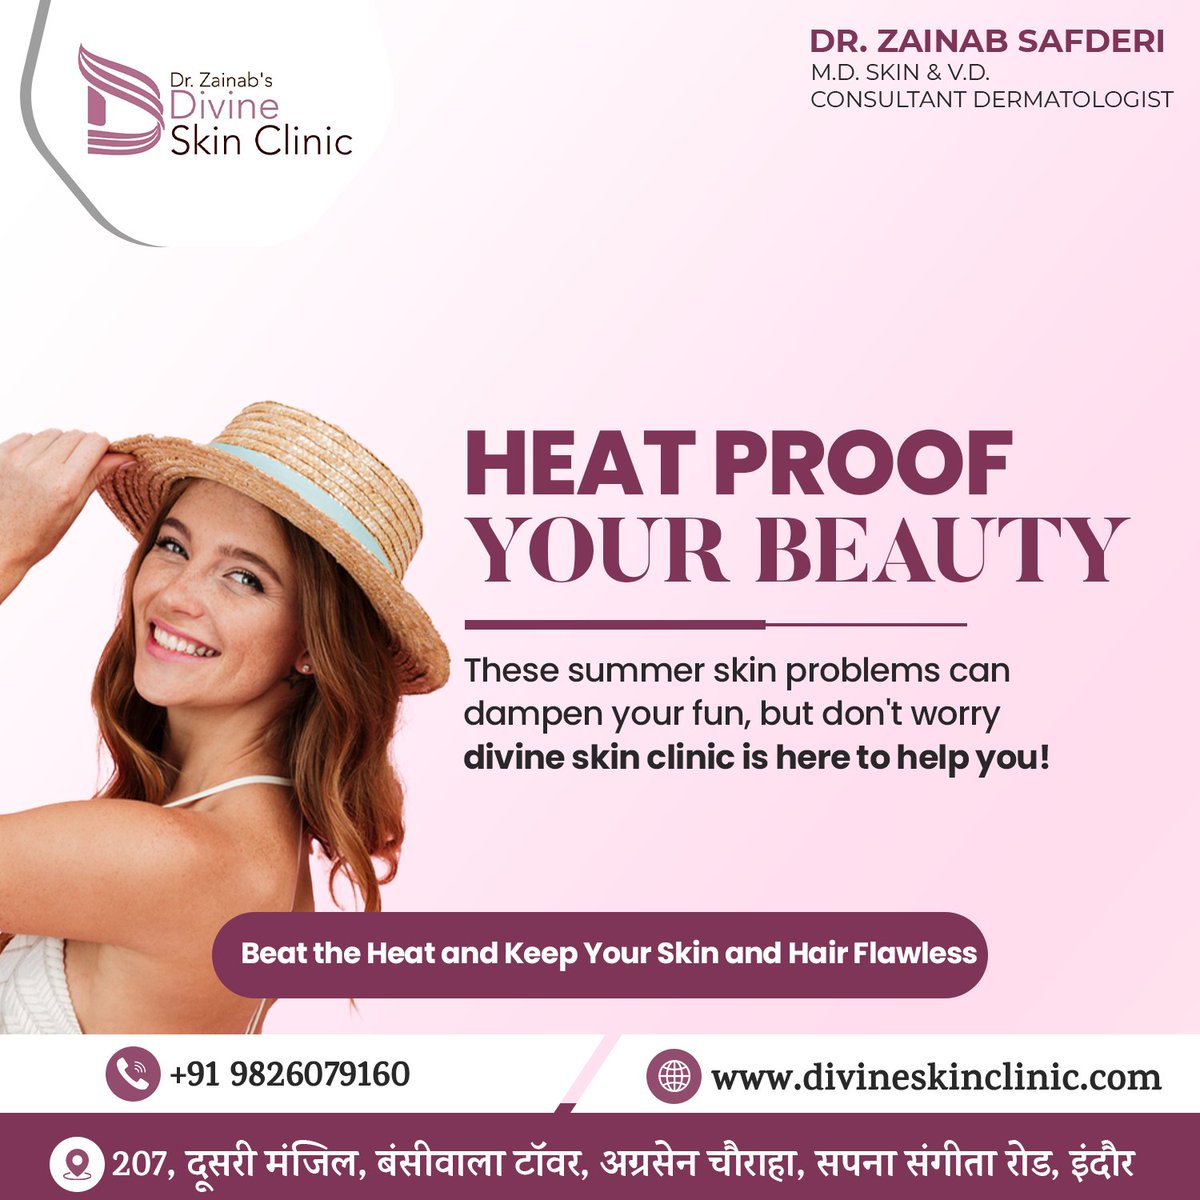 Beat The Heat, Love Your Skin!🌟Stay Cool and Stay Protected😎  Dr. Zainab Safderi +91 9826079160

#beattheheat #summerskin #summerdays #stayhydrated #vaccationtime #skincare #skinhealth #summerskincare #divineskinclinic #DrZaianbSafderi #indorebestskinclinic #indore